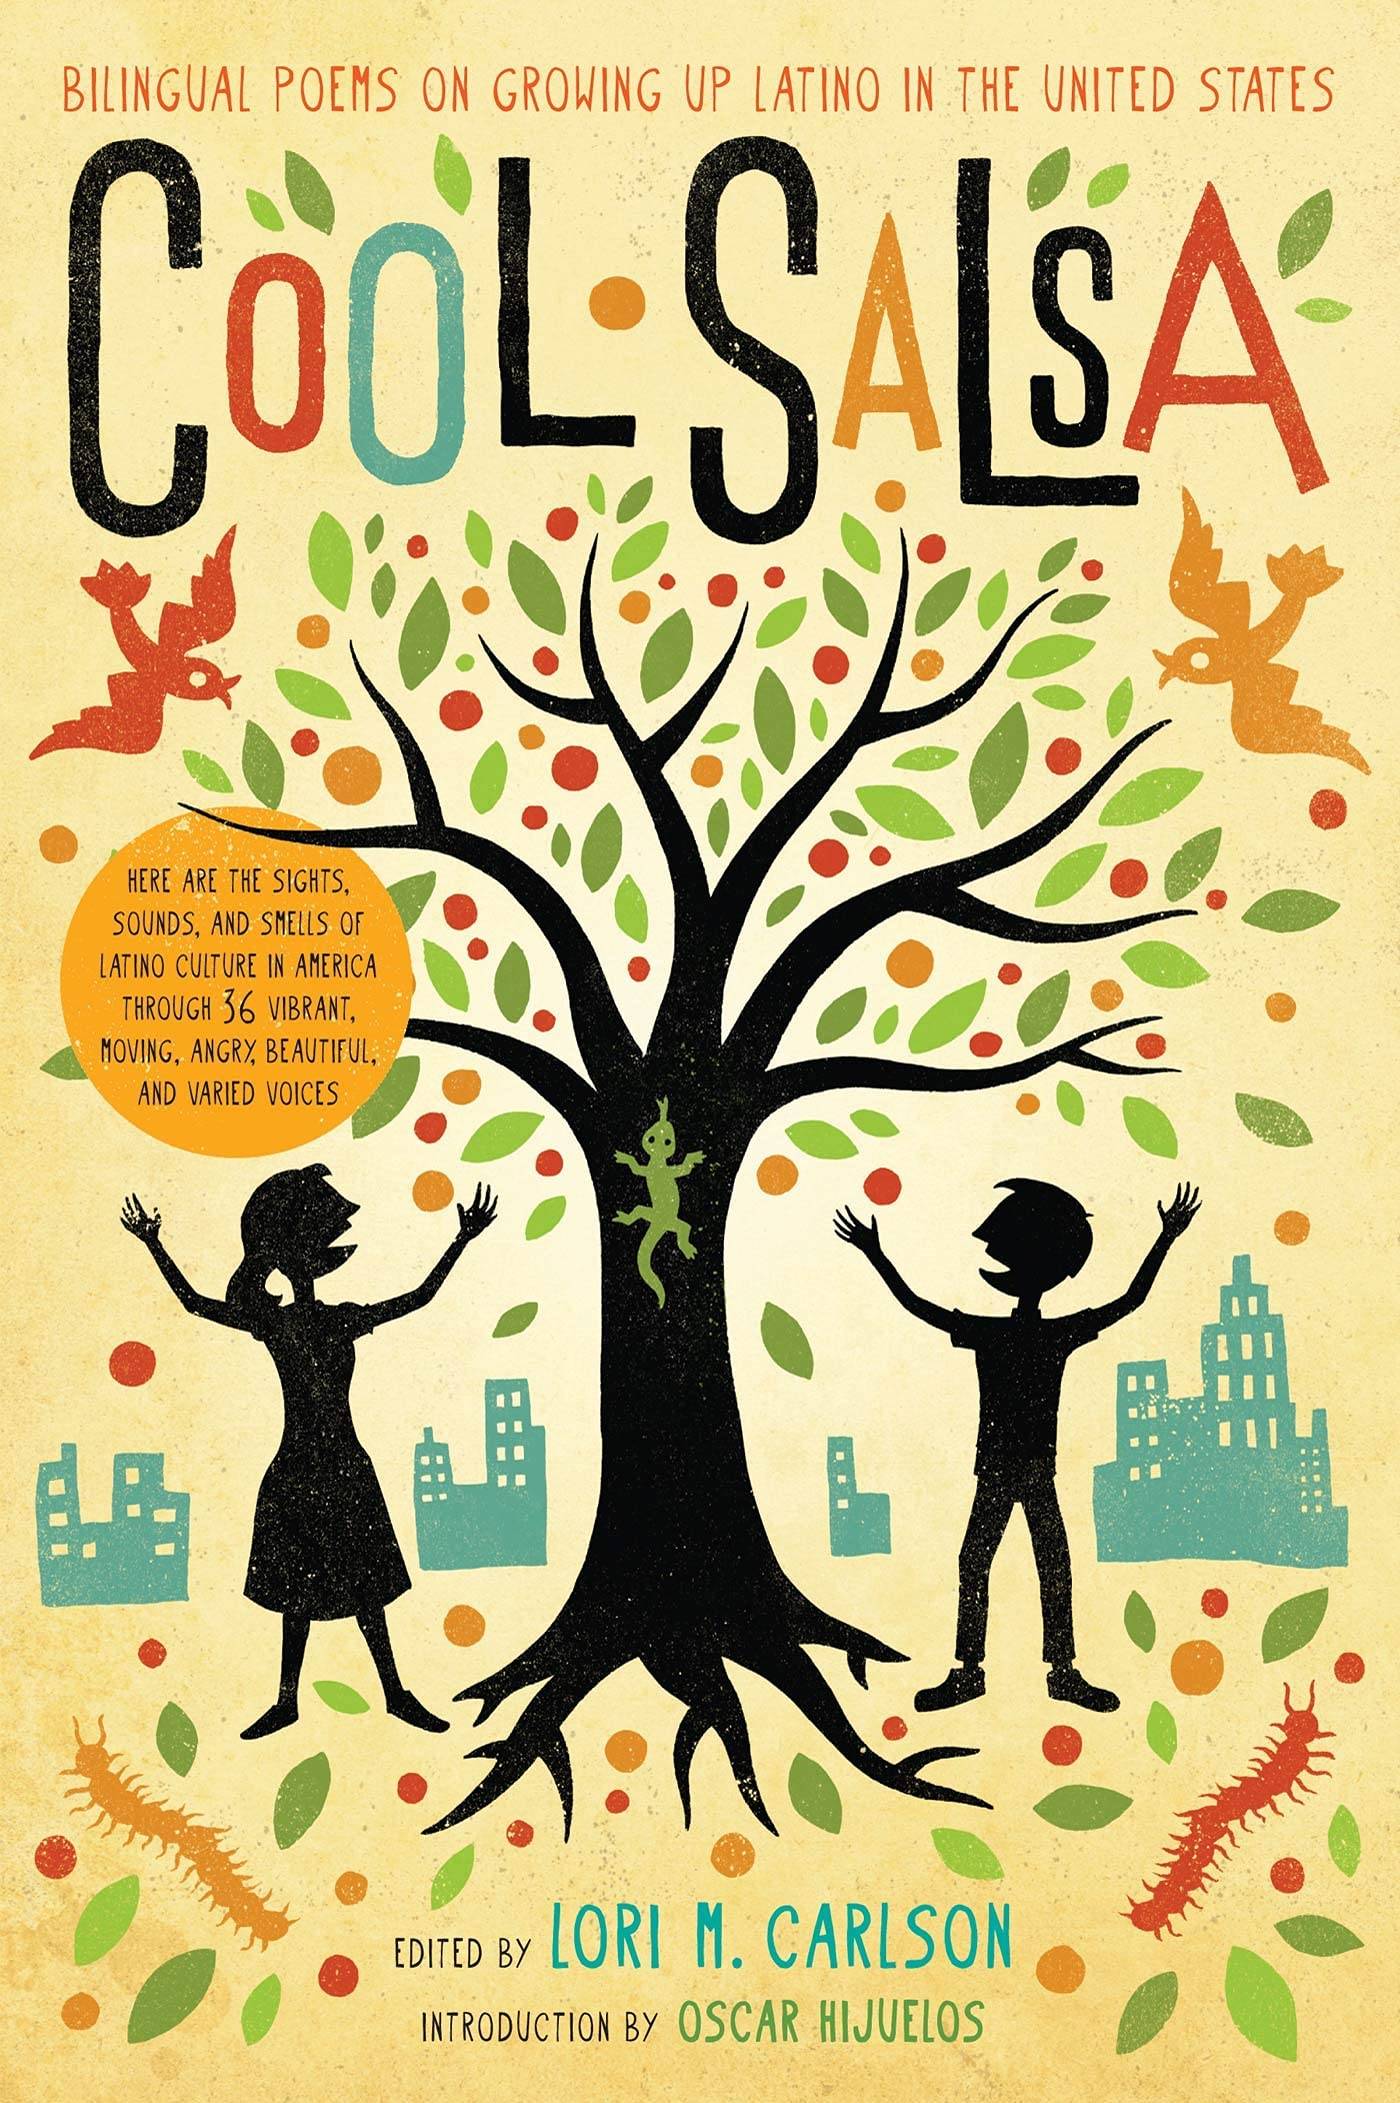 "cool salsa" book cover with a green tree in the center and two figures standing beneath it and reaching toward the sky.